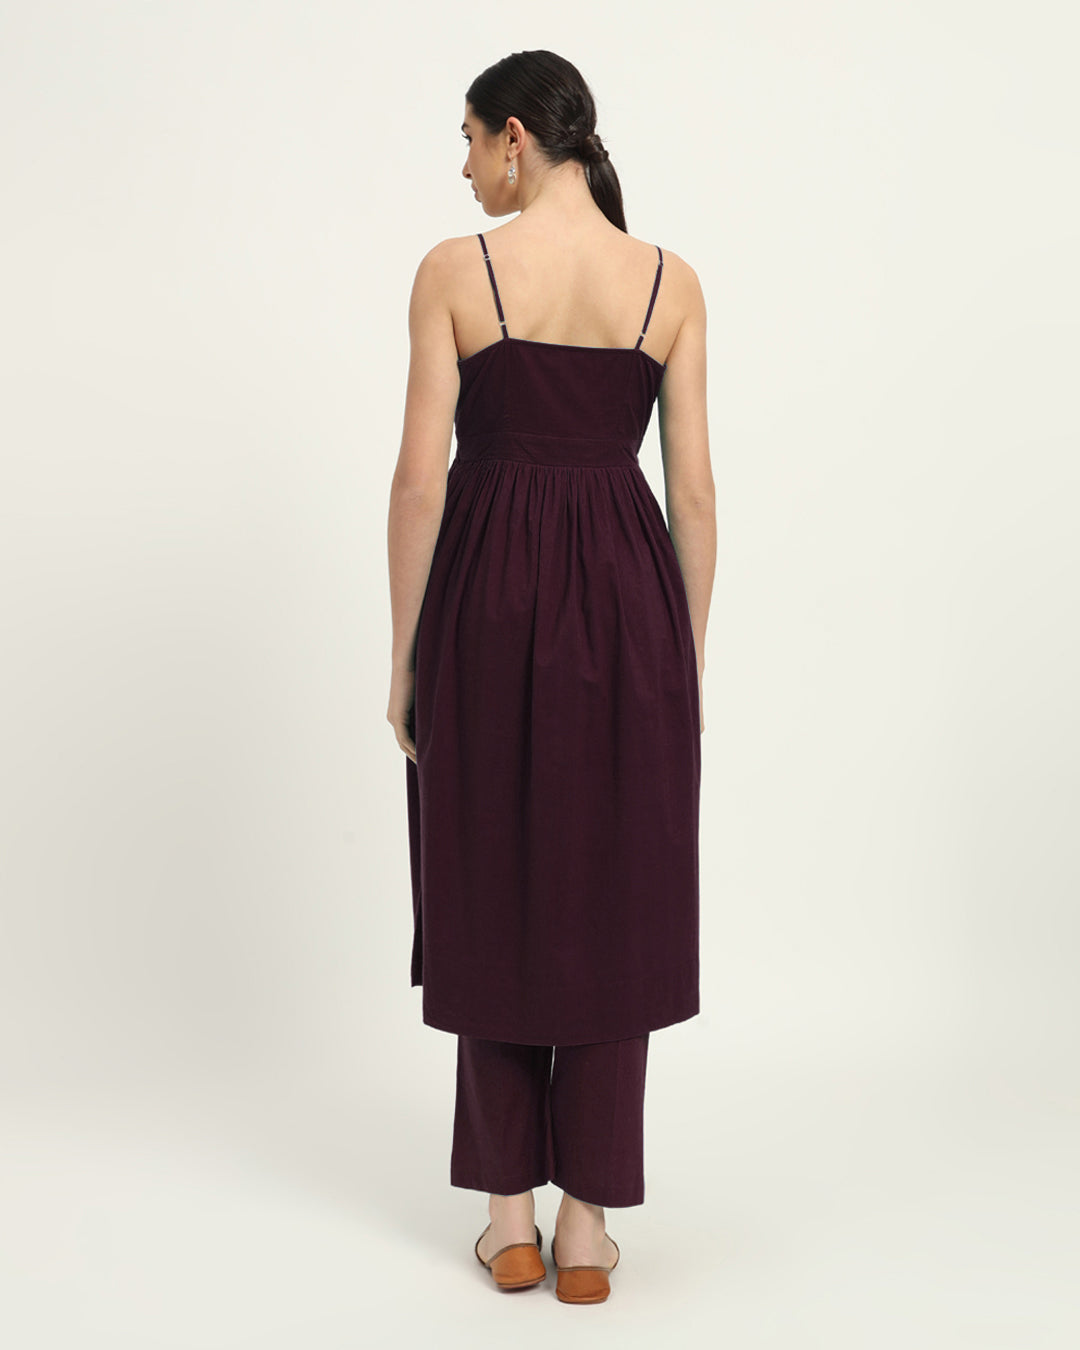 Plum Passion Vogue Spaghetti Gathered Solid Co-ord Set